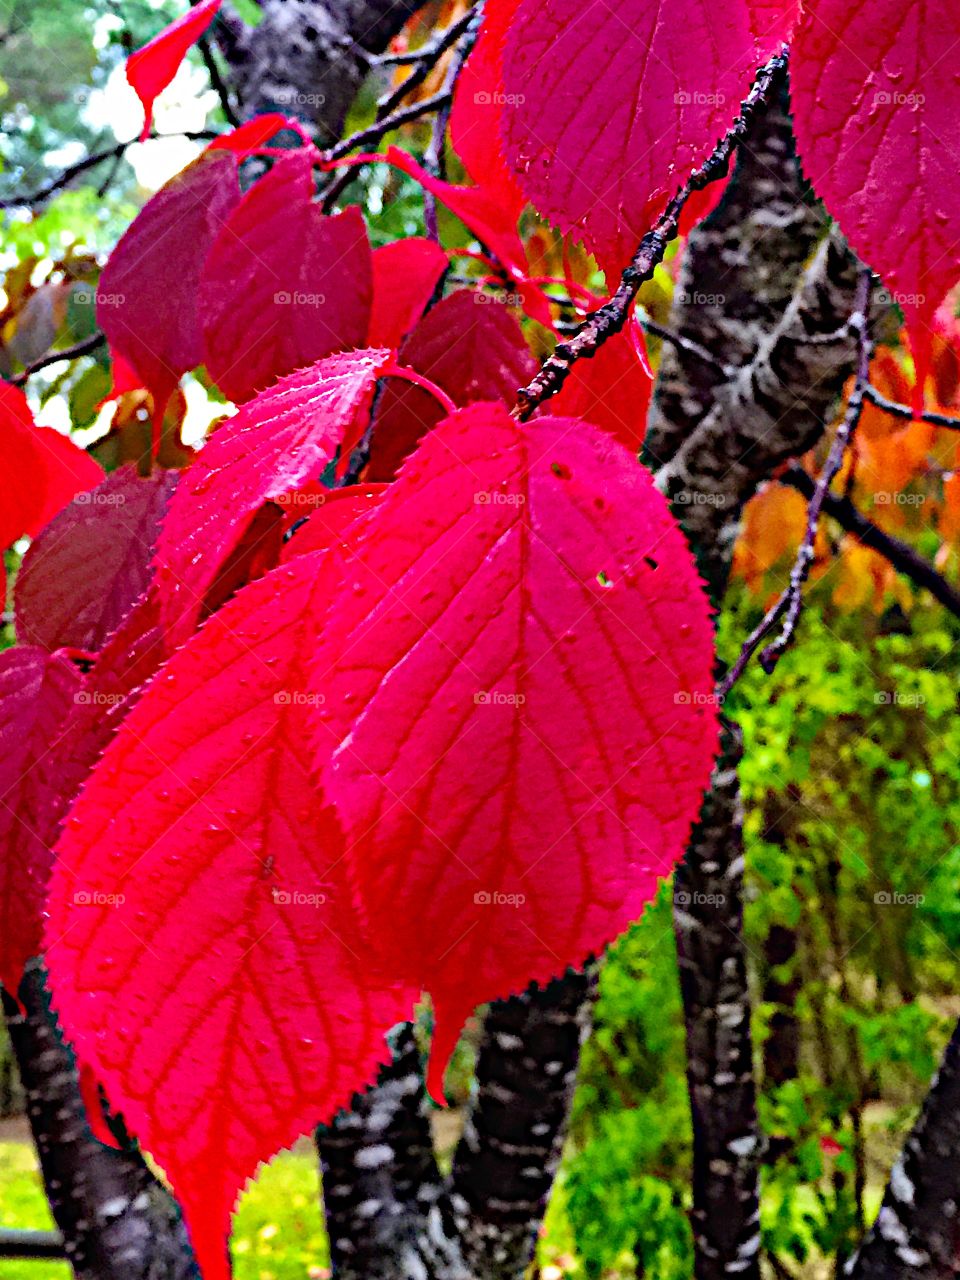 Colorful red leaf!